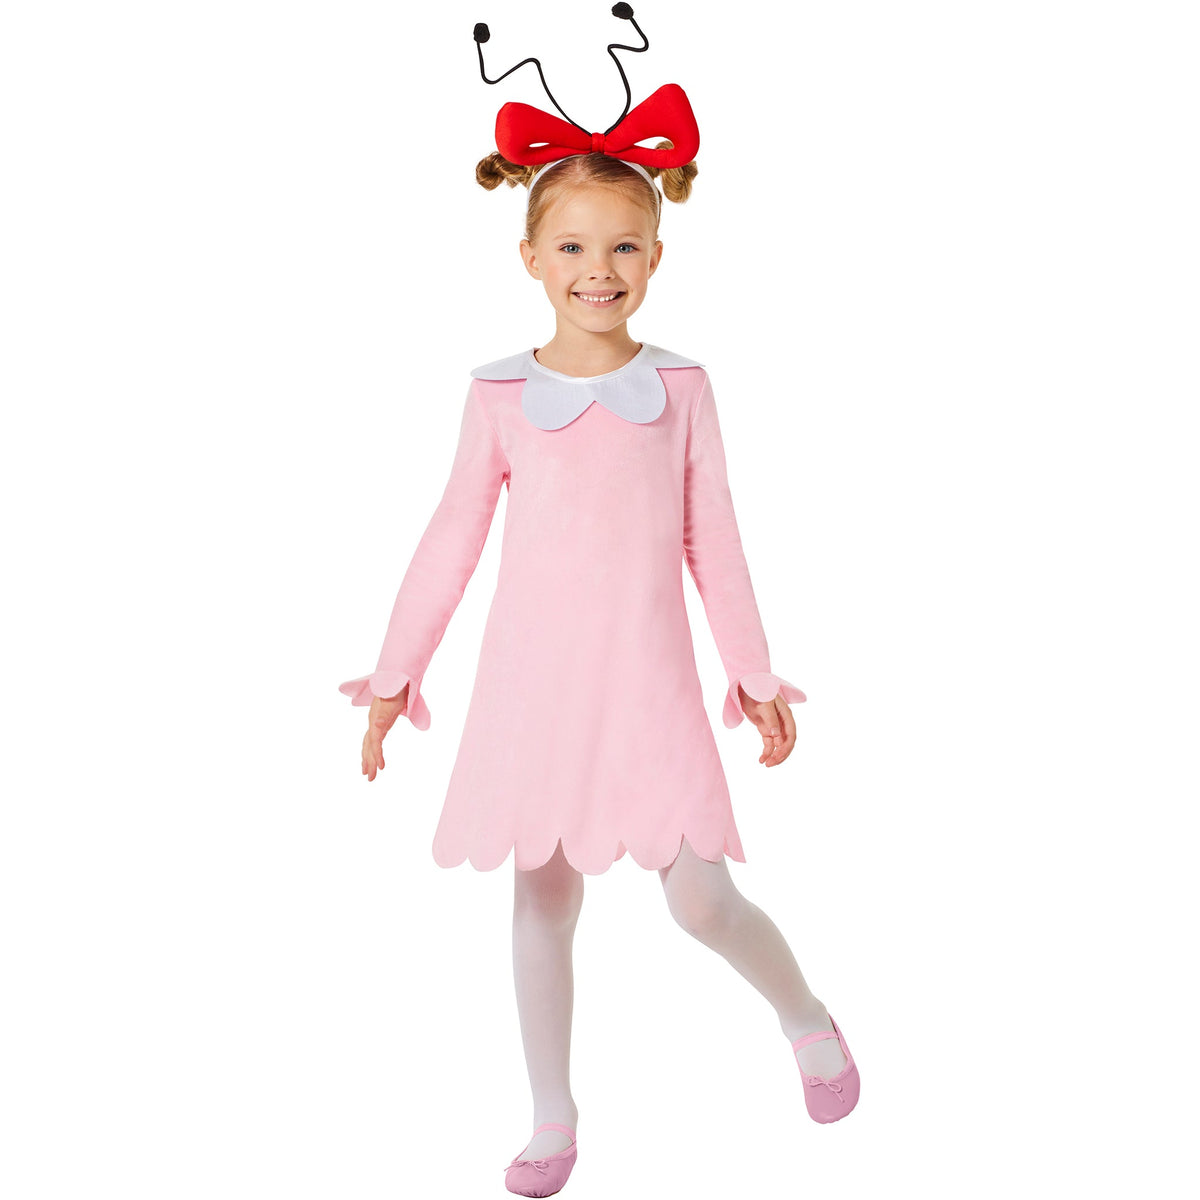 Dr. Seuss: Cindy-Lou Who Toddler Costume